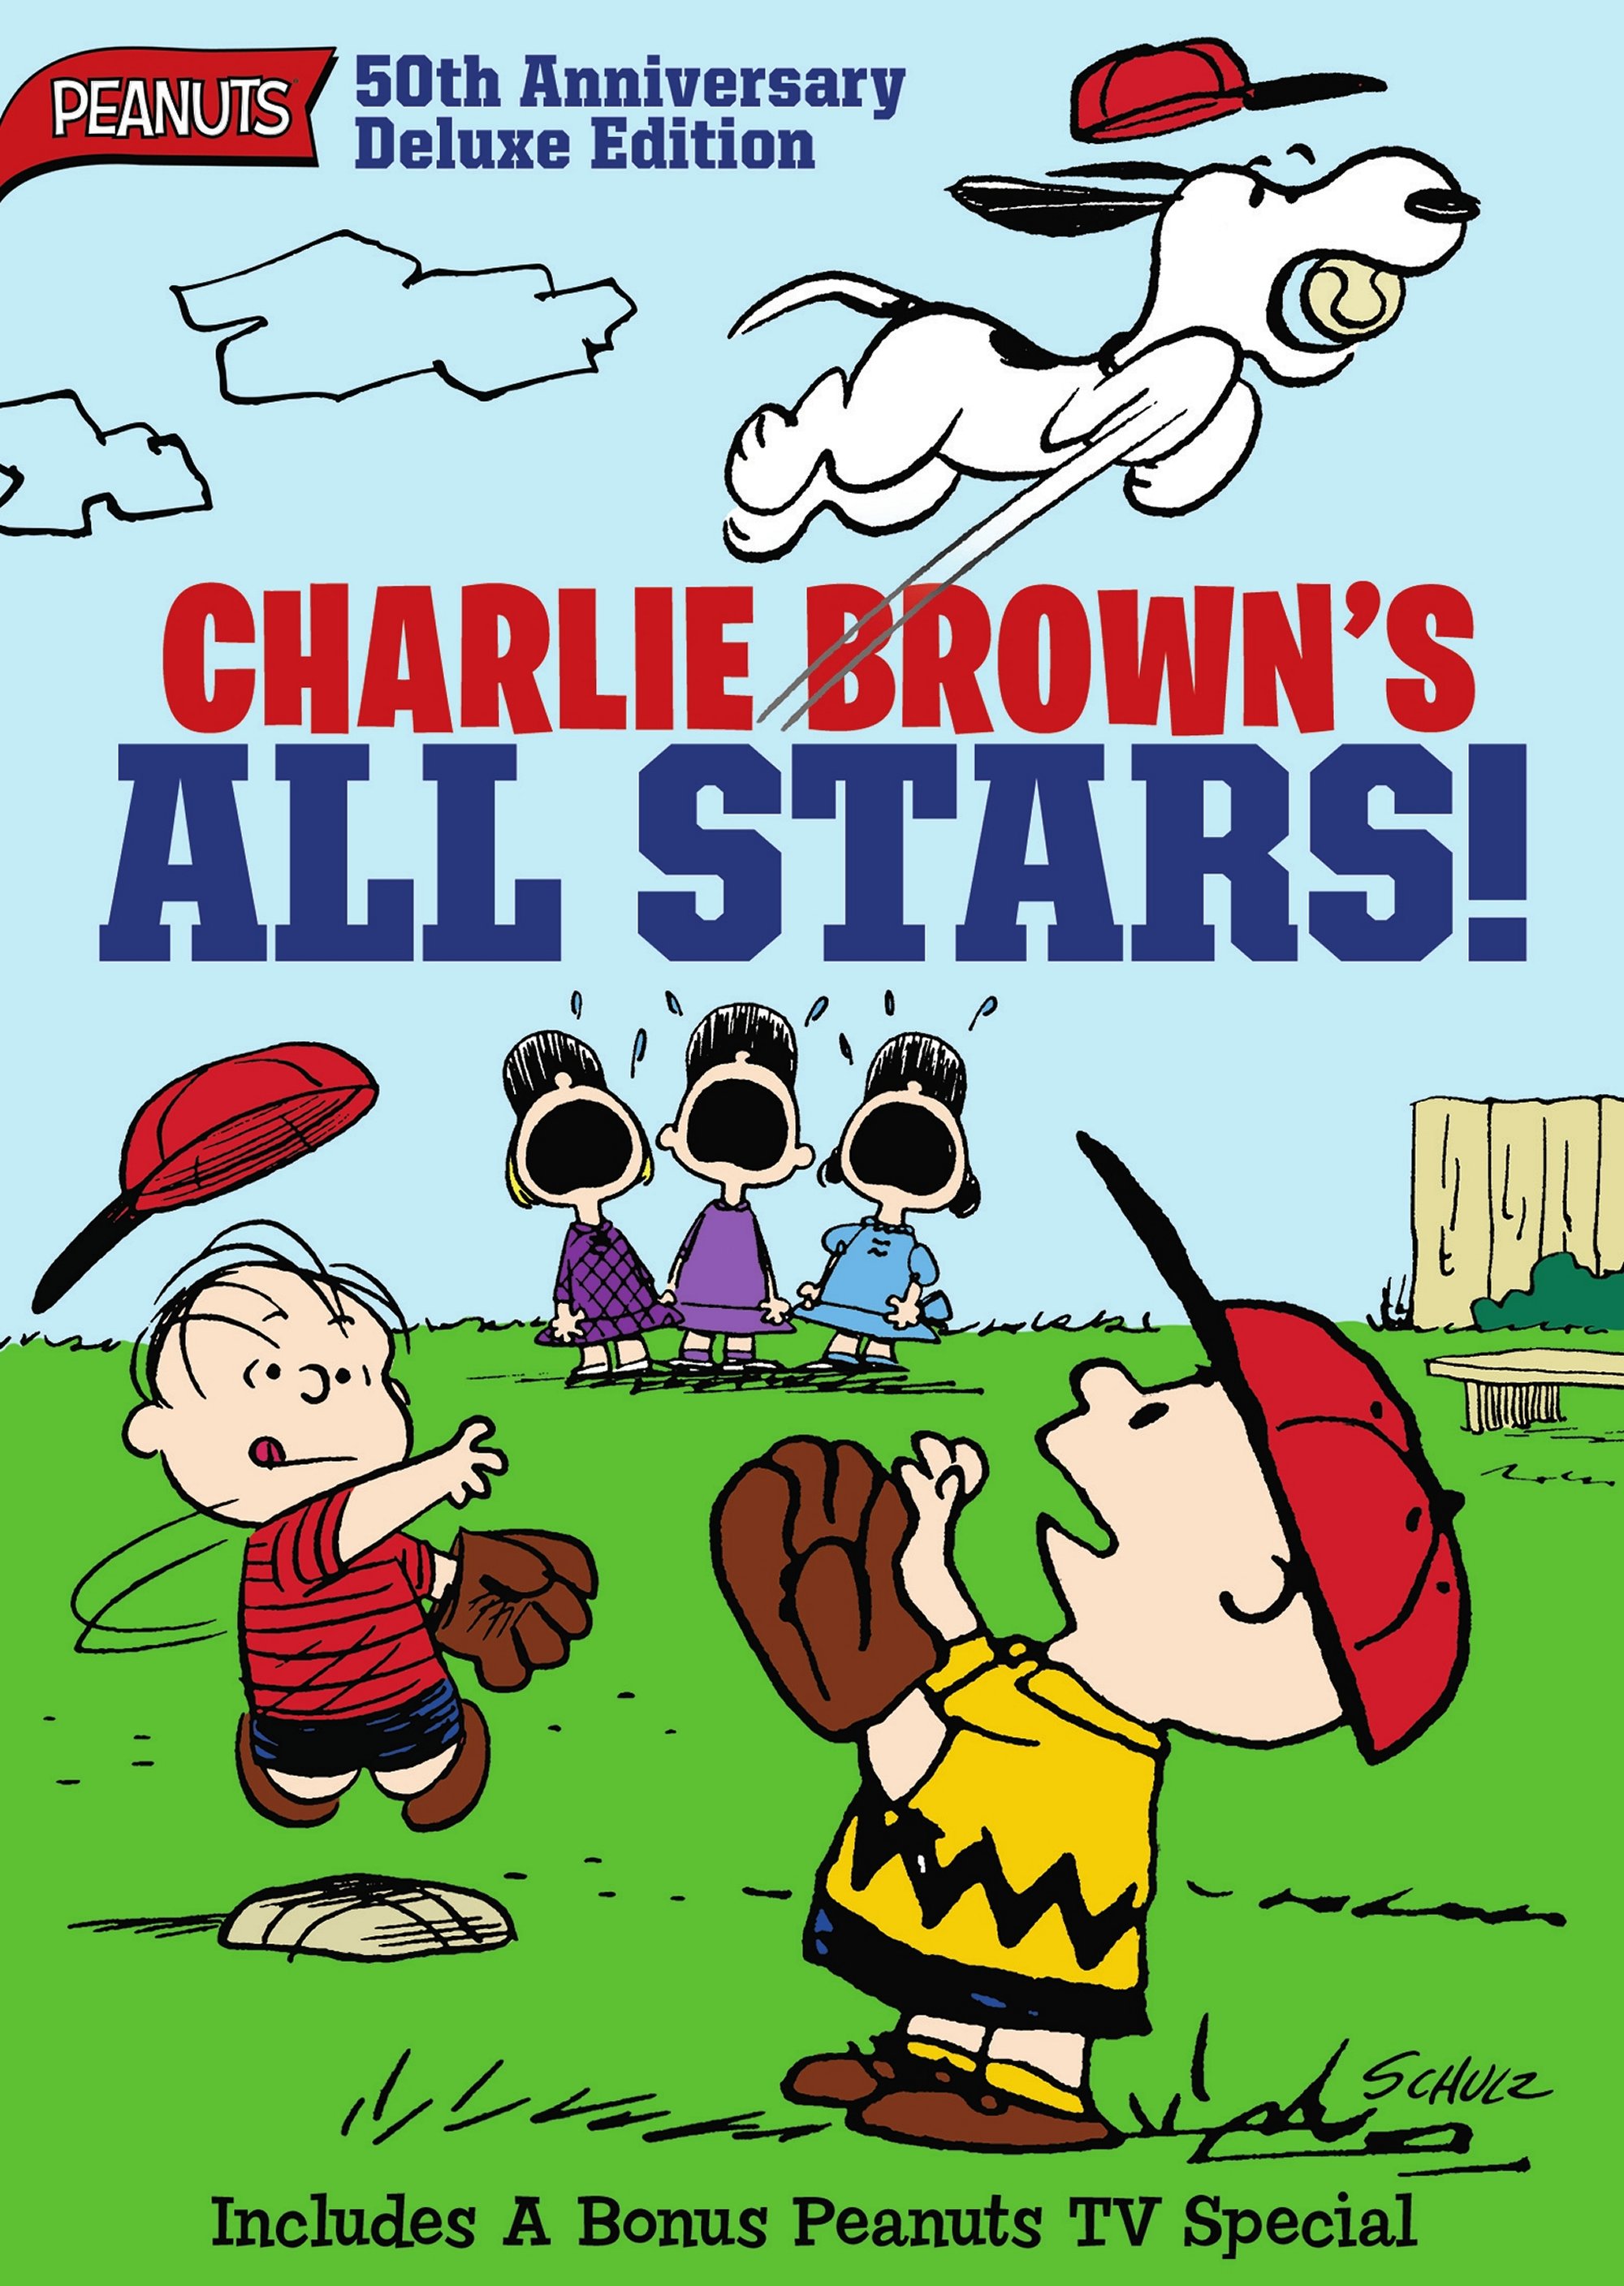 Charlie Brown’s All-Stars (50th Anniversary Deluxe Edition) DVD Review